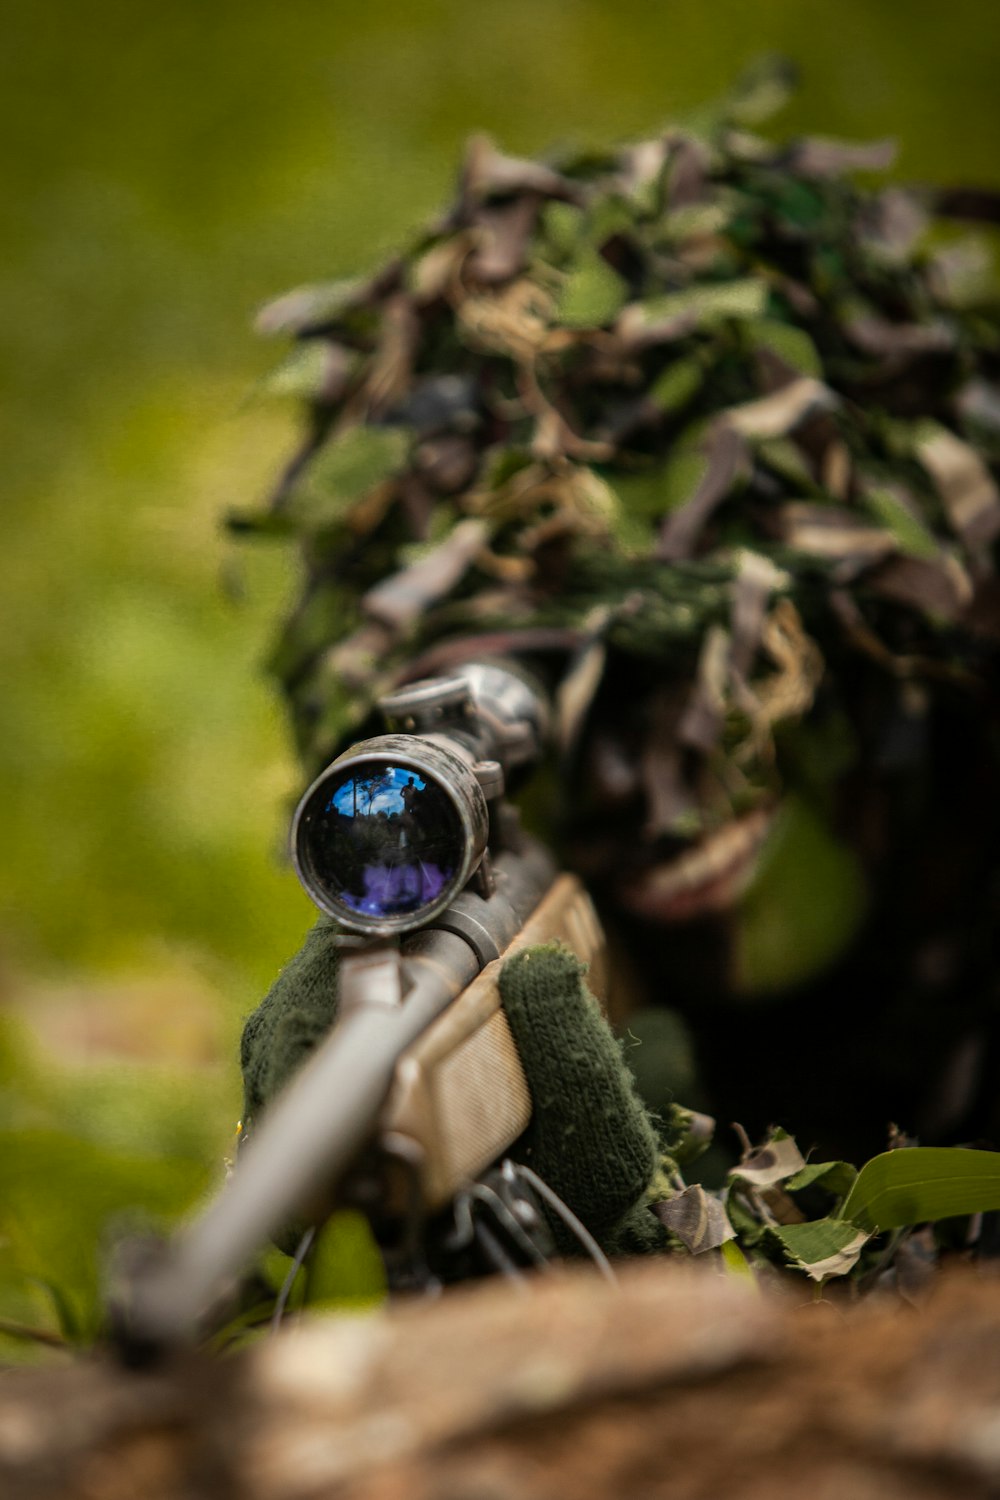 a close up of a toy gun with a camouflage hat on it